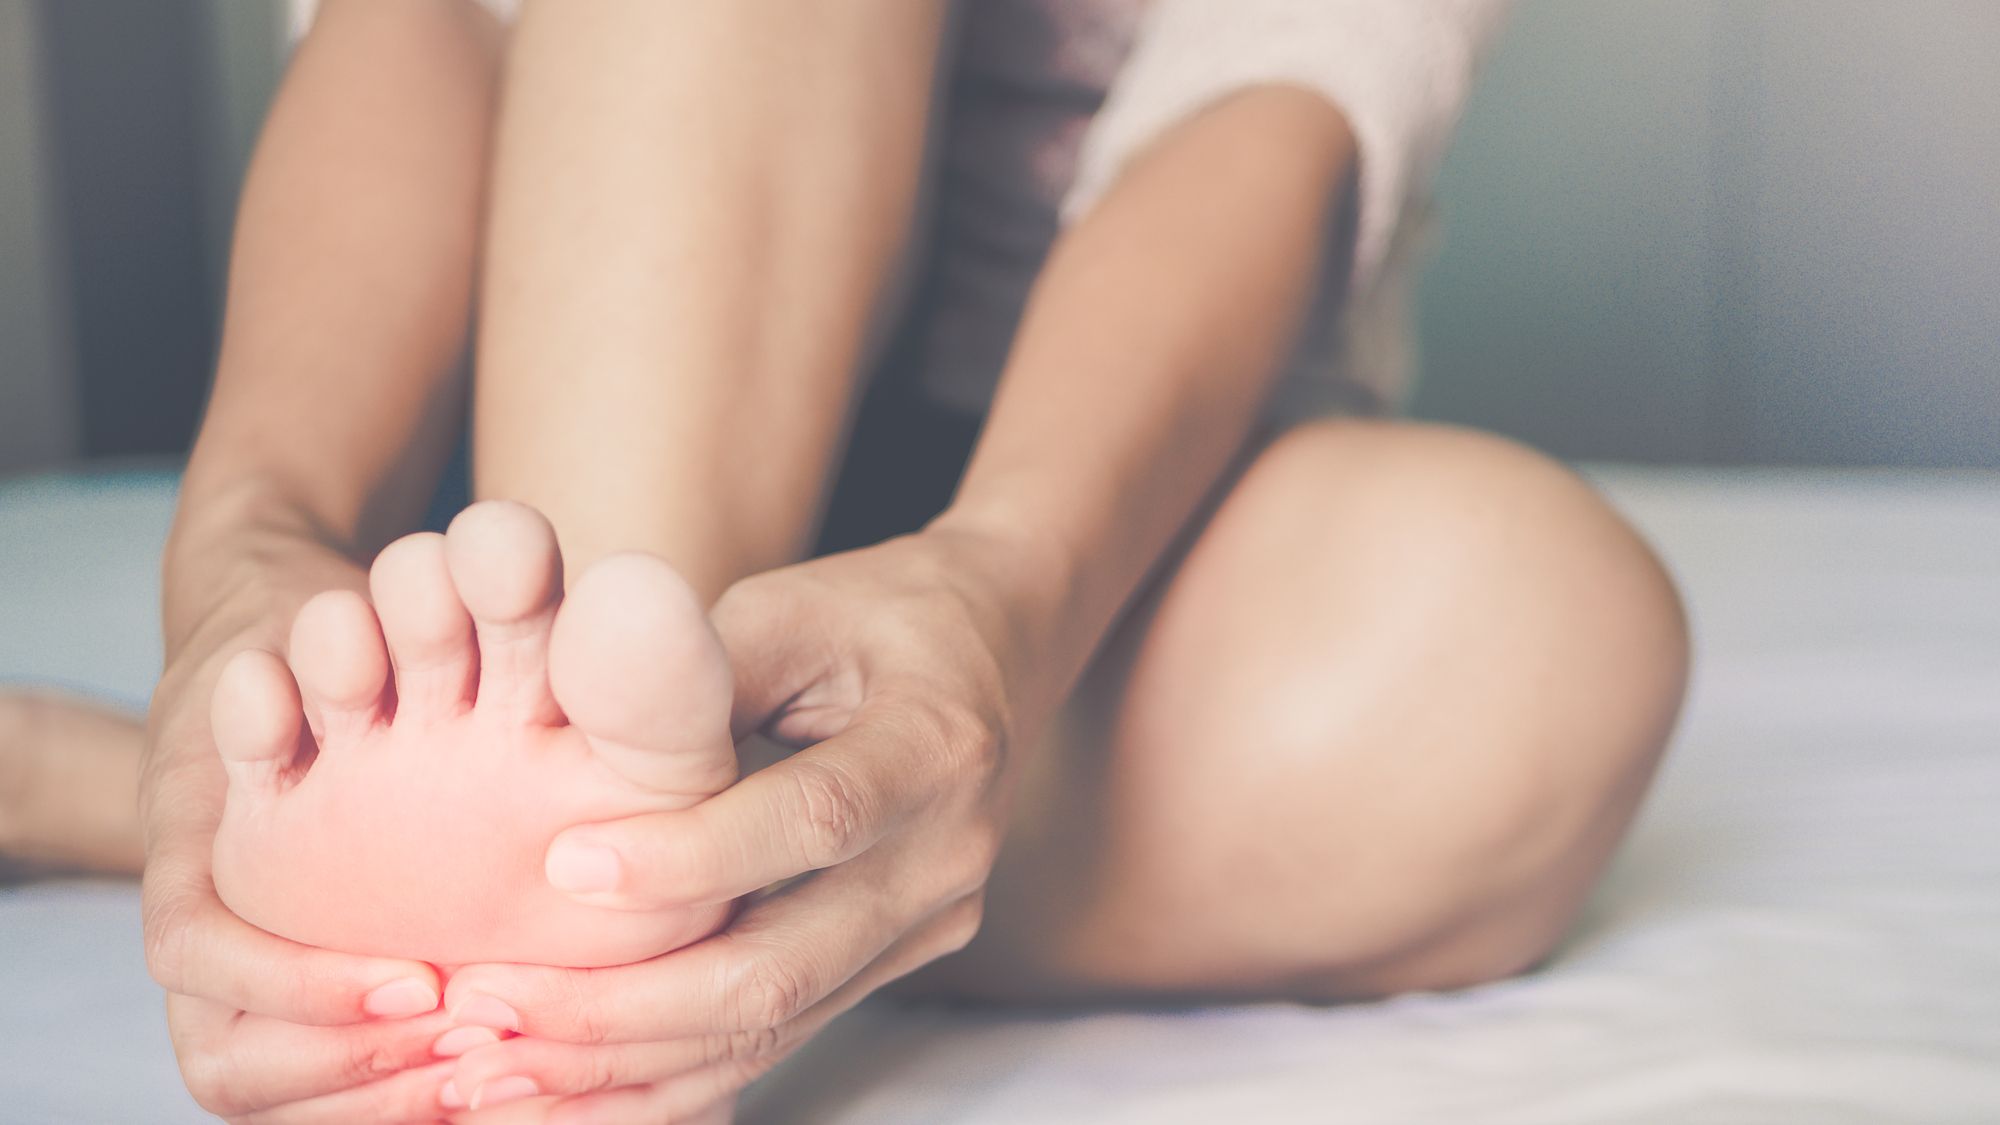 Why are my toes red? Causes, other symptoms, and treatments